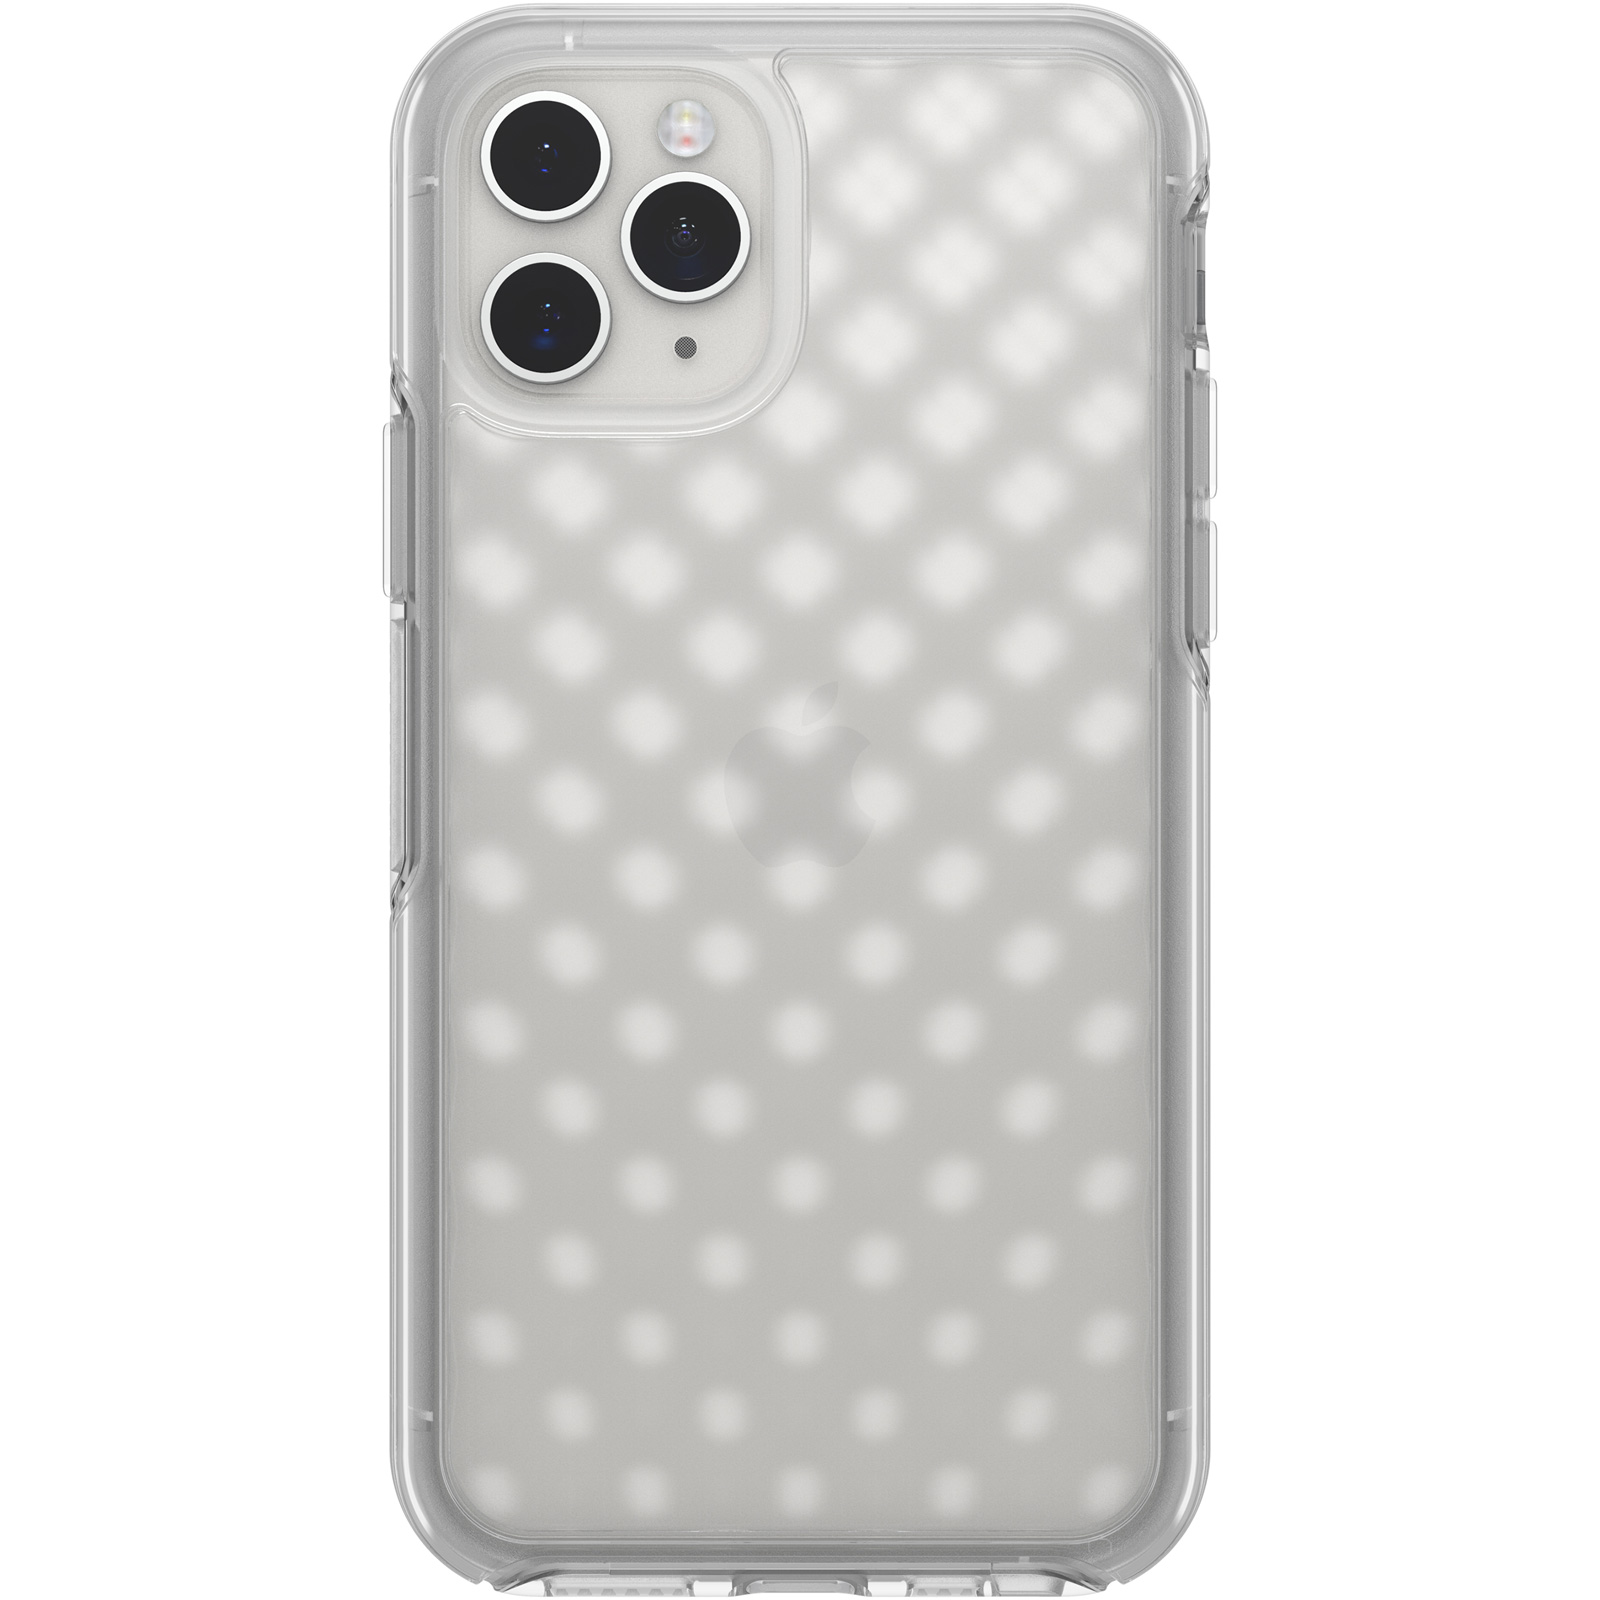 iPhone 11 Pro Vue Series Case Clear